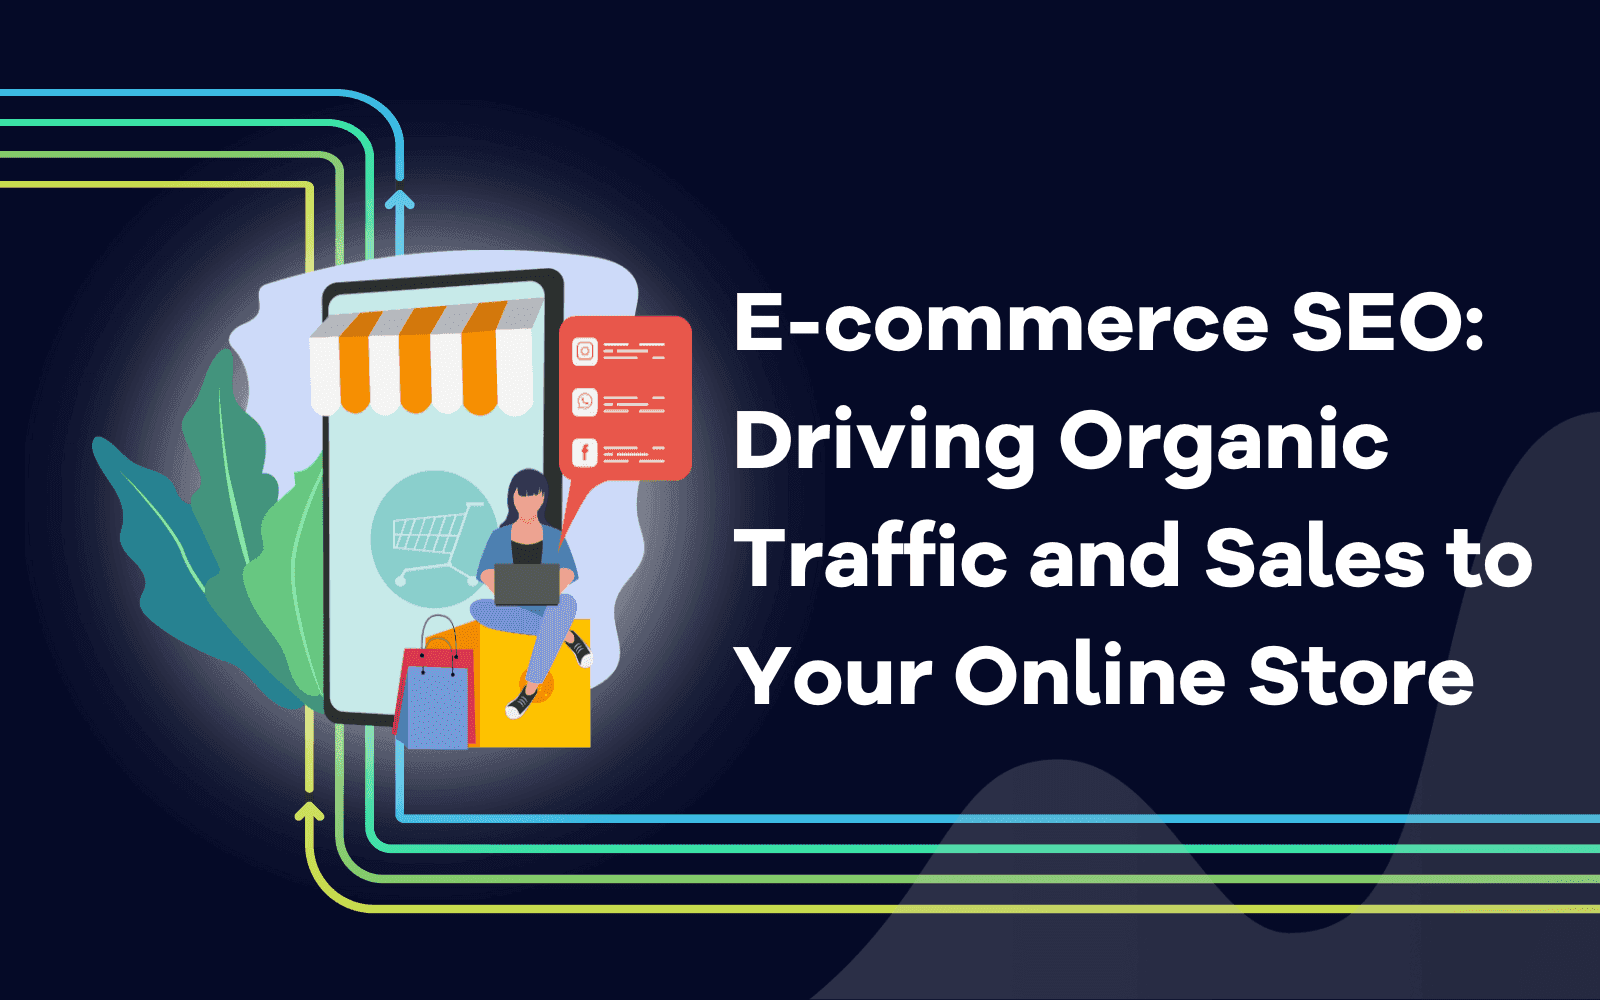 eCommerce SEO: How to Bring Organic Traffic to Your Online Store